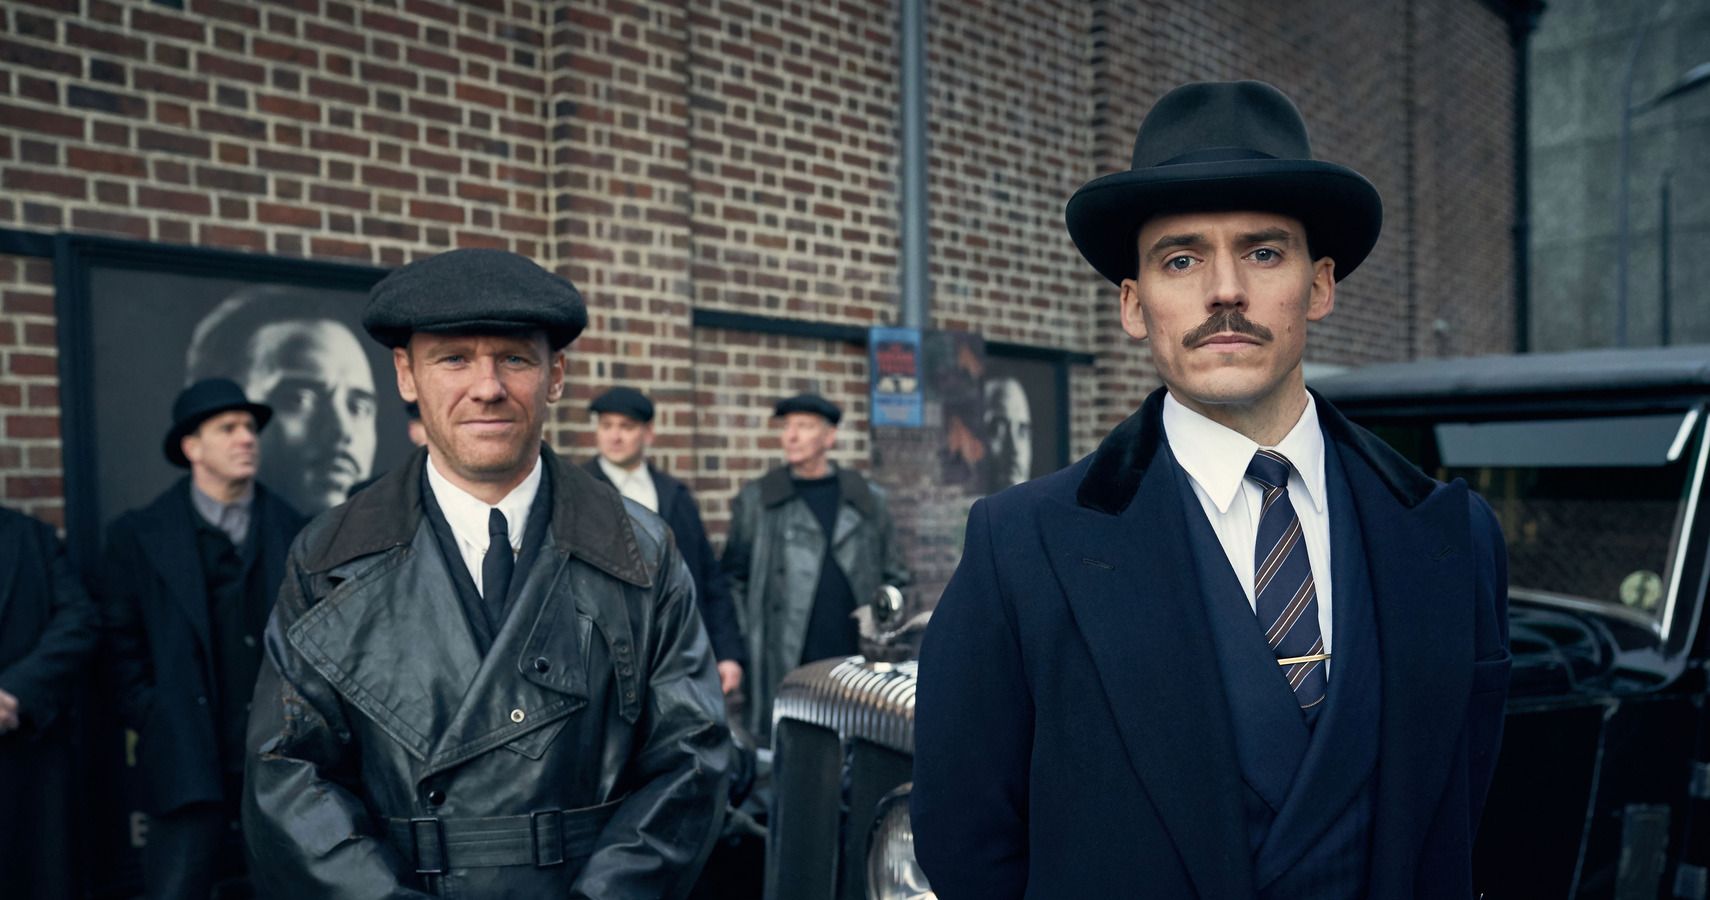 The 10 Best Episodes Of Peaky Blinders (According To IMDb)